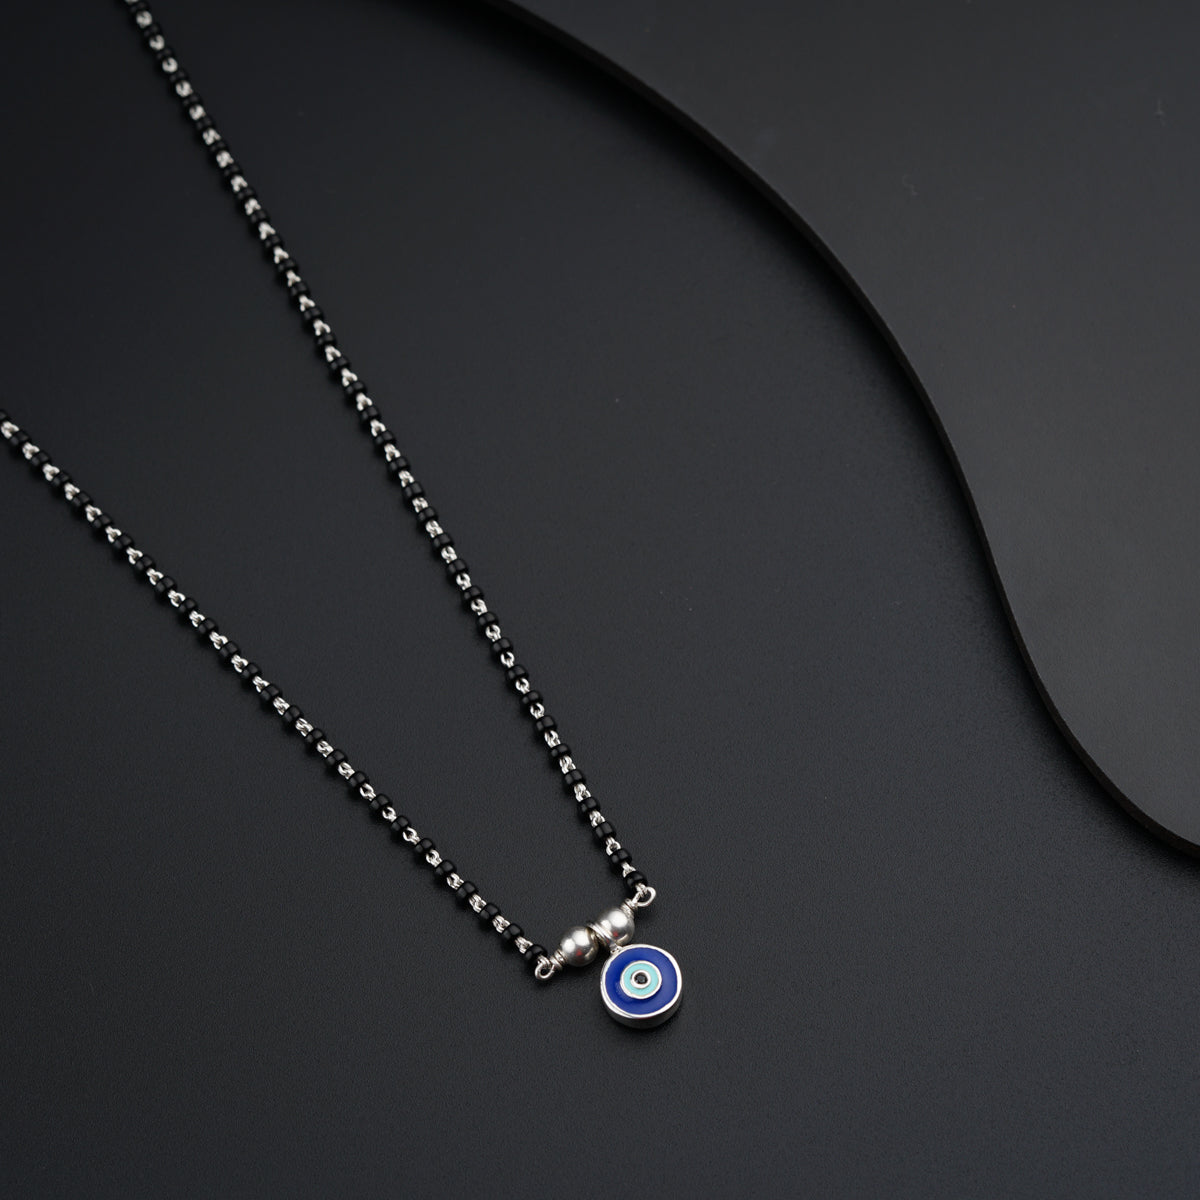 a necklace with a evil eye on it